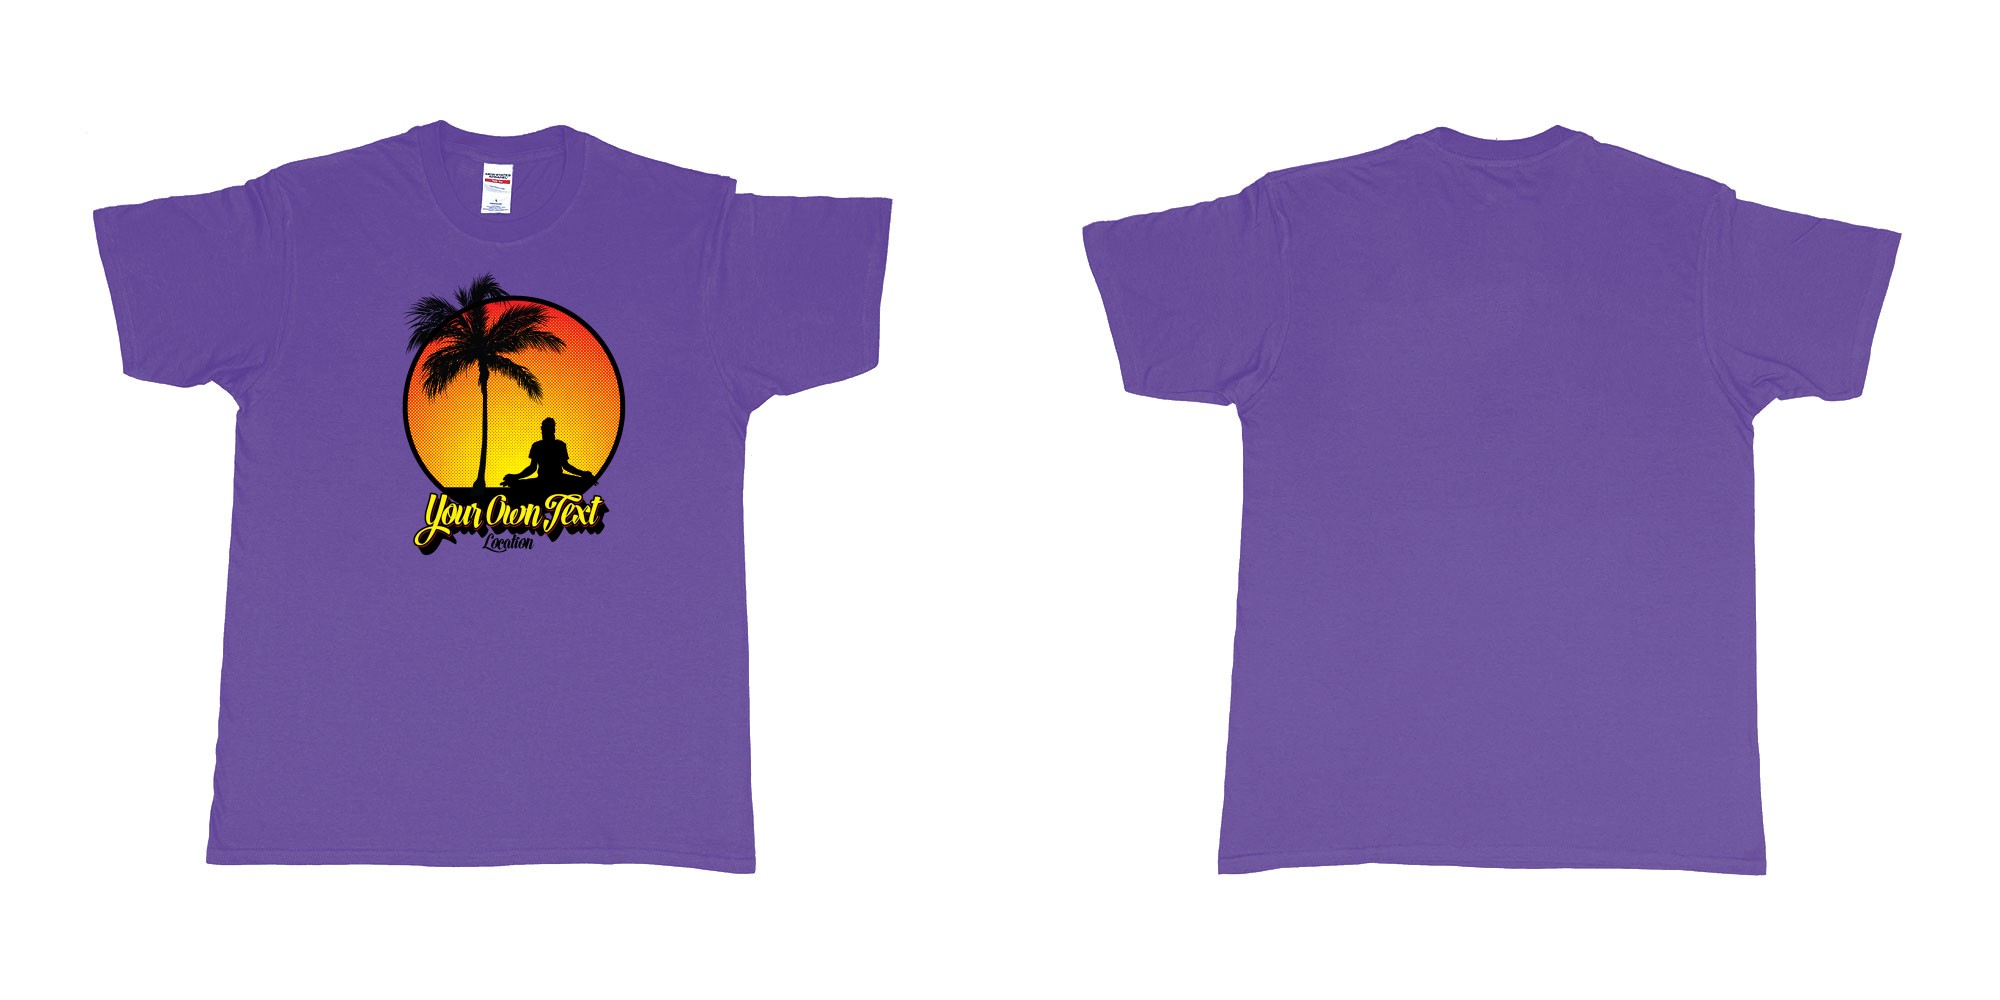 Custom tshirt design yoga palmtree sunset halftone your own text location screen printing bali in fabric color purple choice your own text made in Bali by The Pirate Way